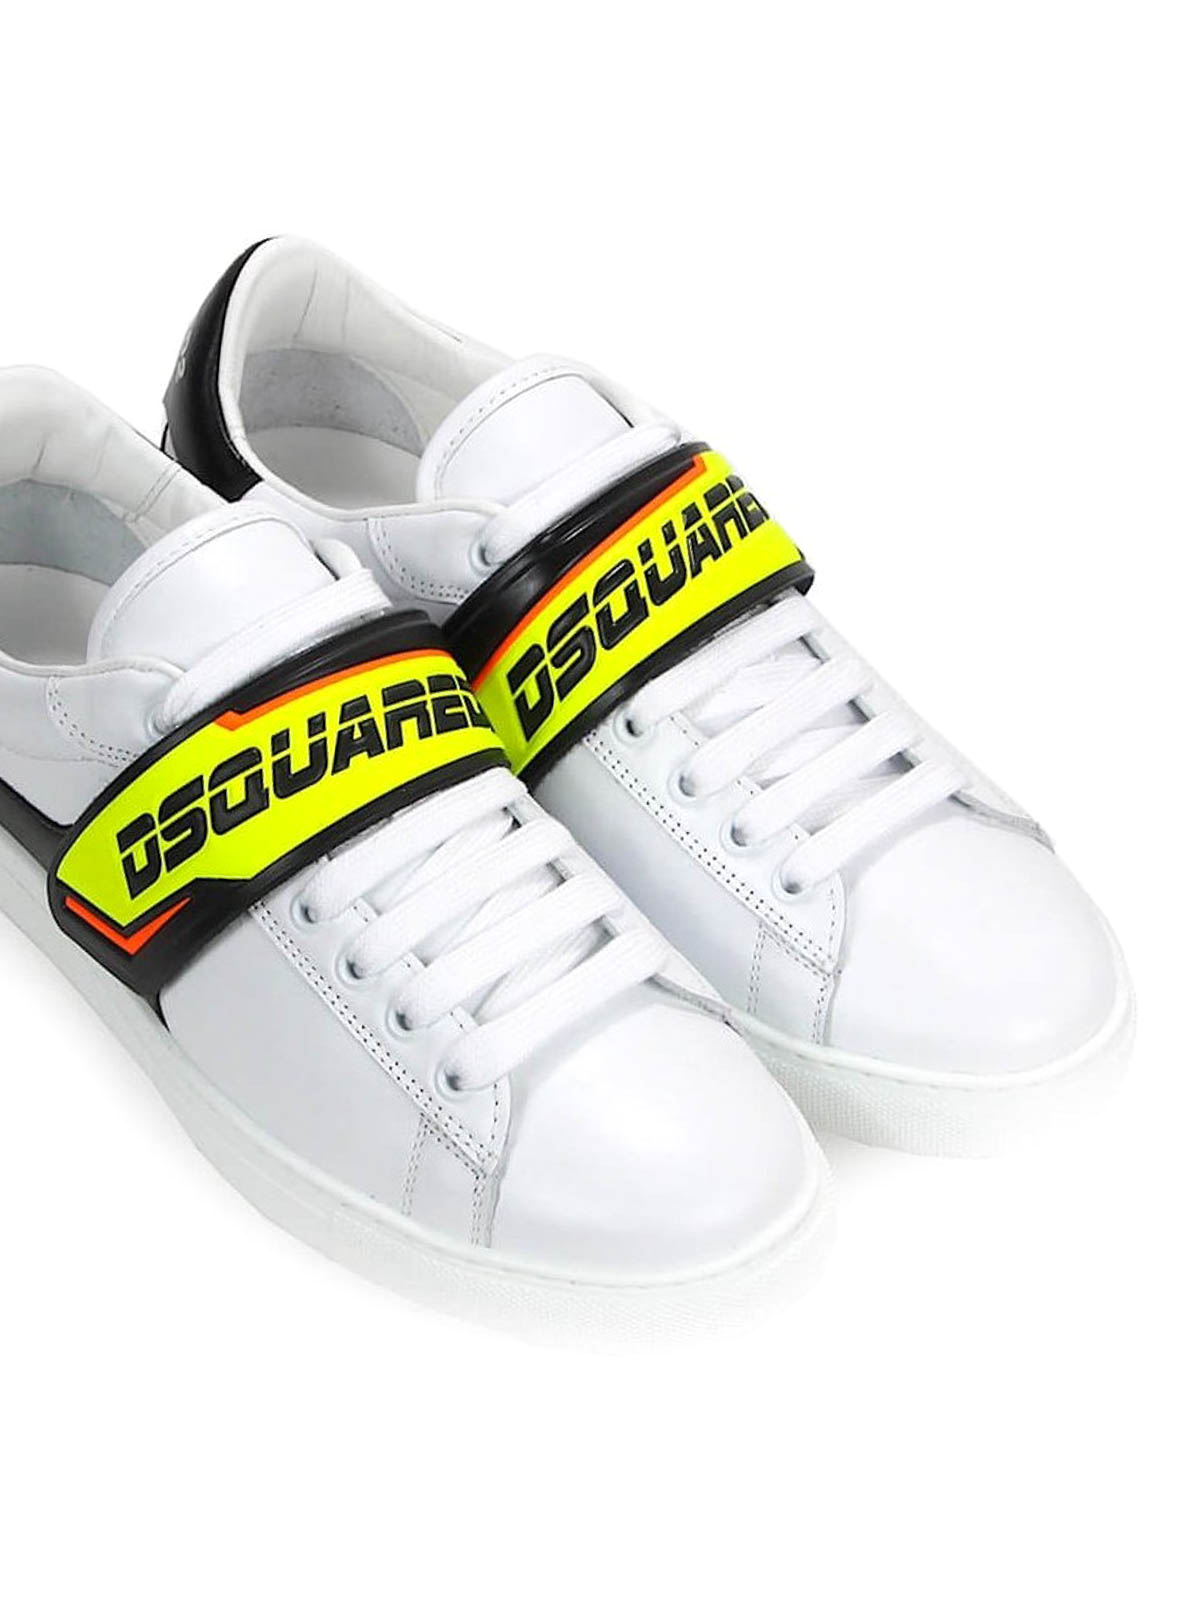 new tennis sneakers dsquared2